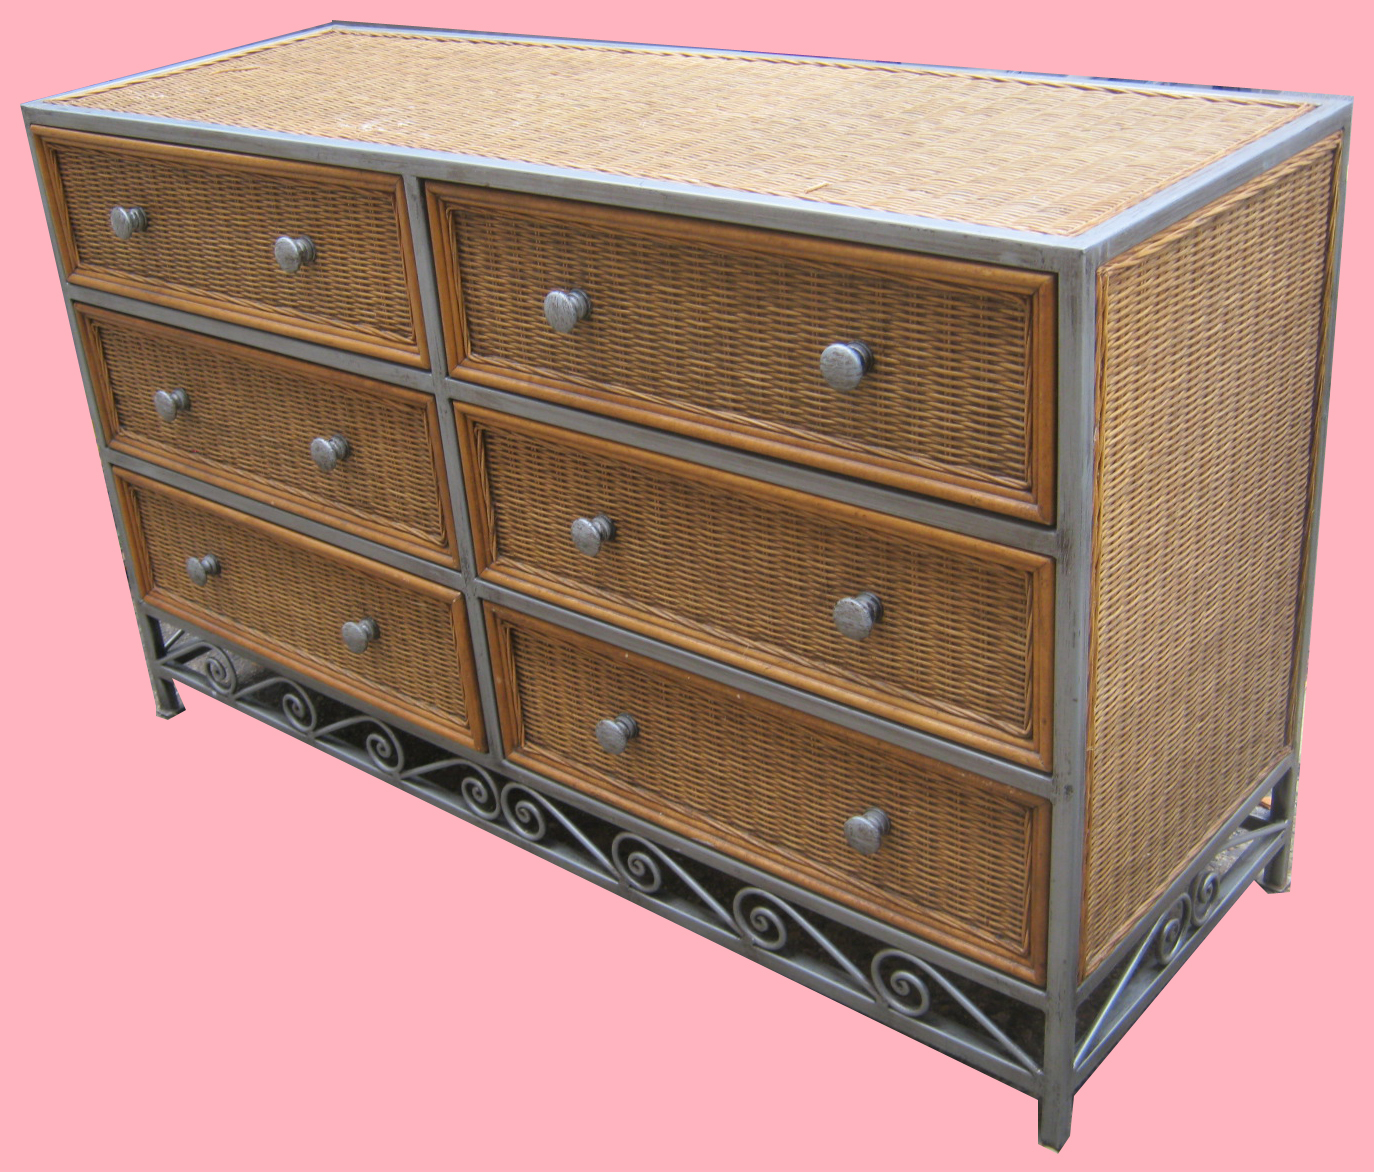 ... Furniture & Collectibles: Wicker & Brushed Metal Bedroom Furniture